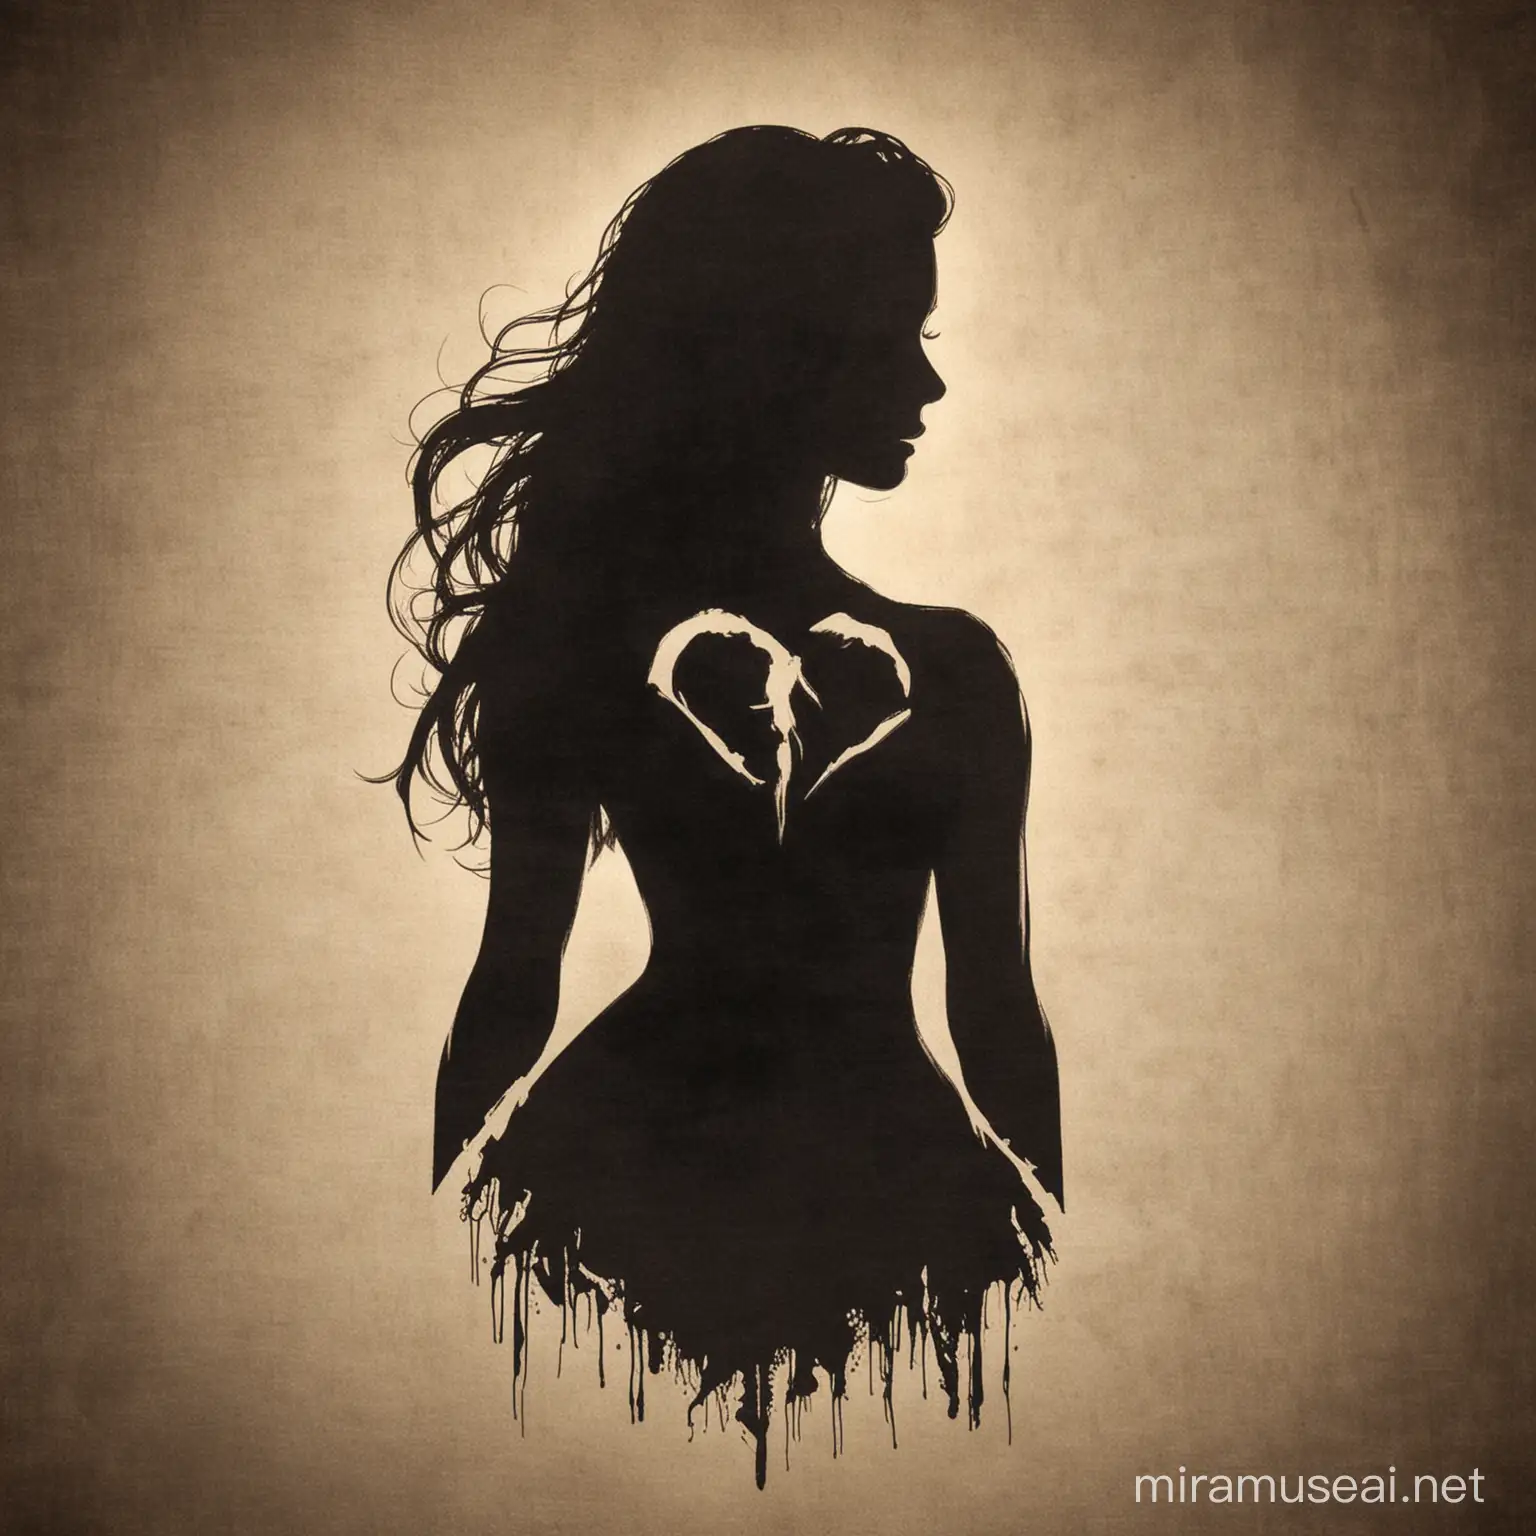 Empowered Woman Silhouette Symbolizing Strength and Authority